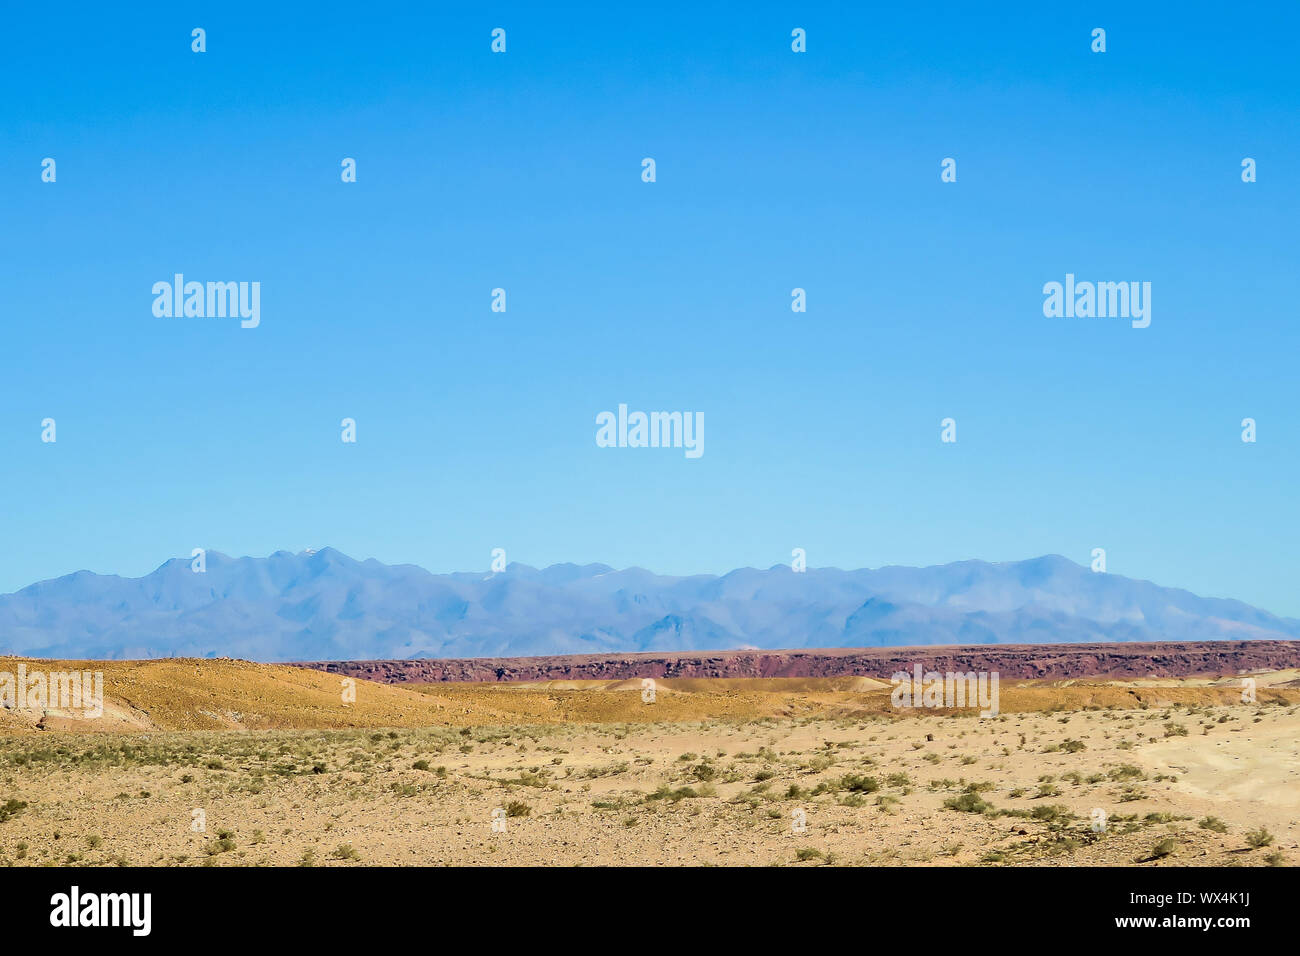 landscape with mountains and blue sky, photo as background Stock Photo